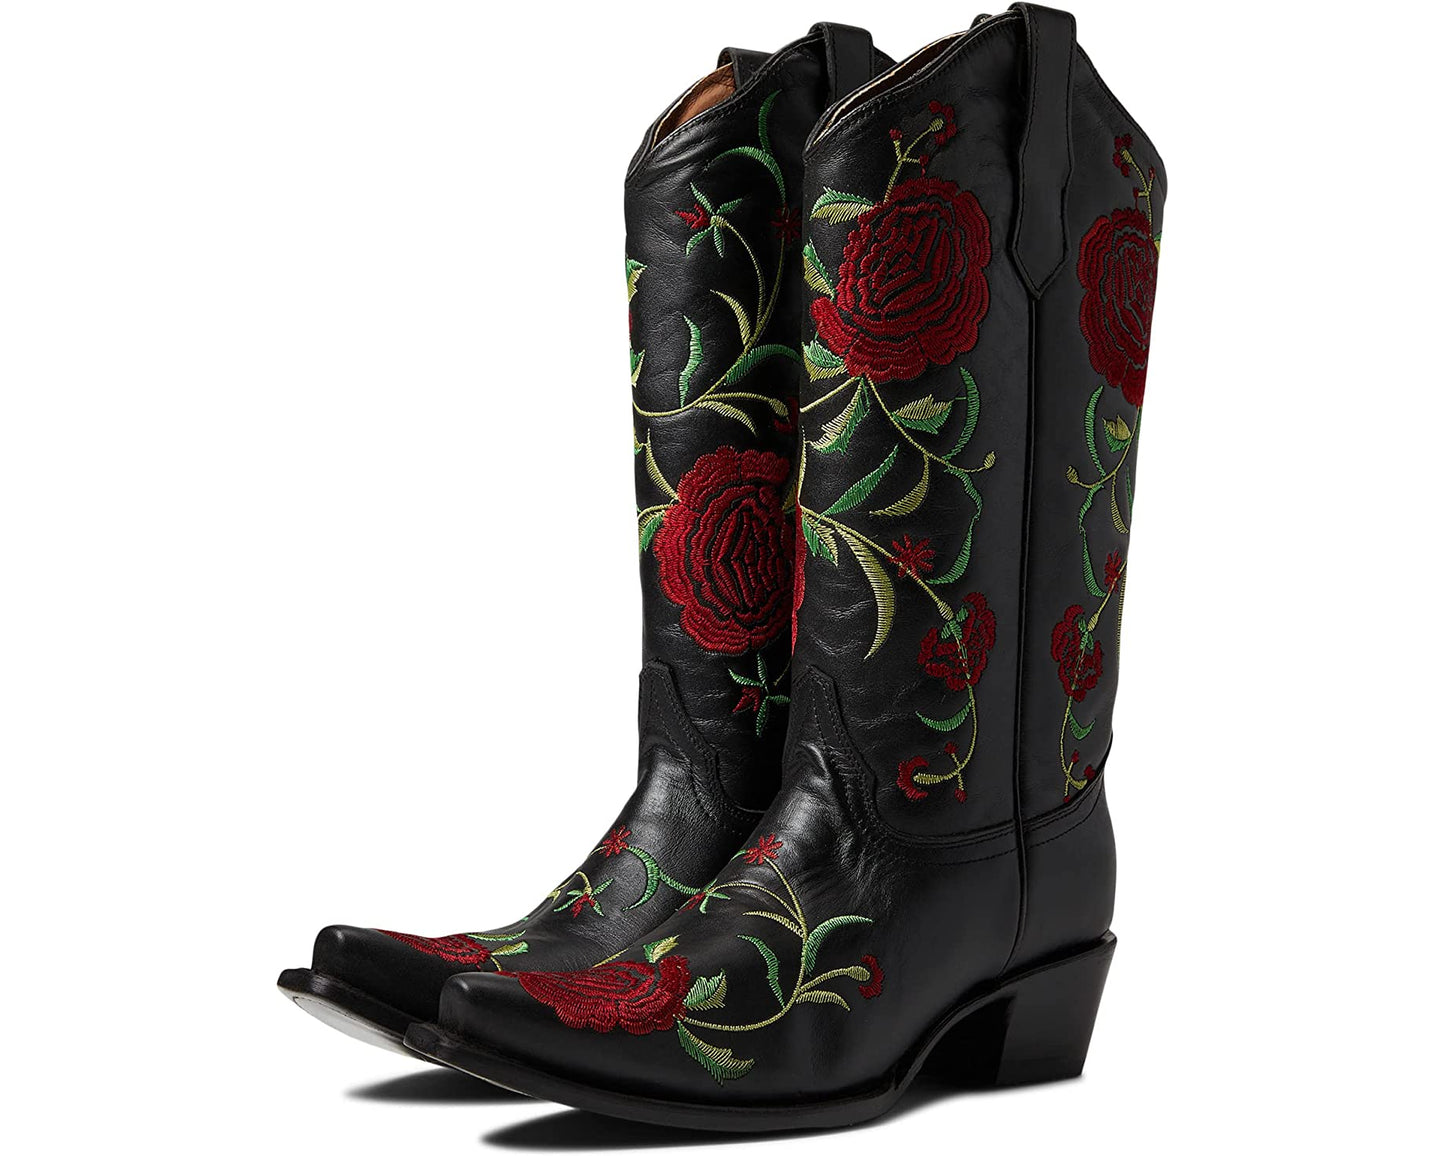 Ladies Rose Embroidered Black Snip Toe Boots